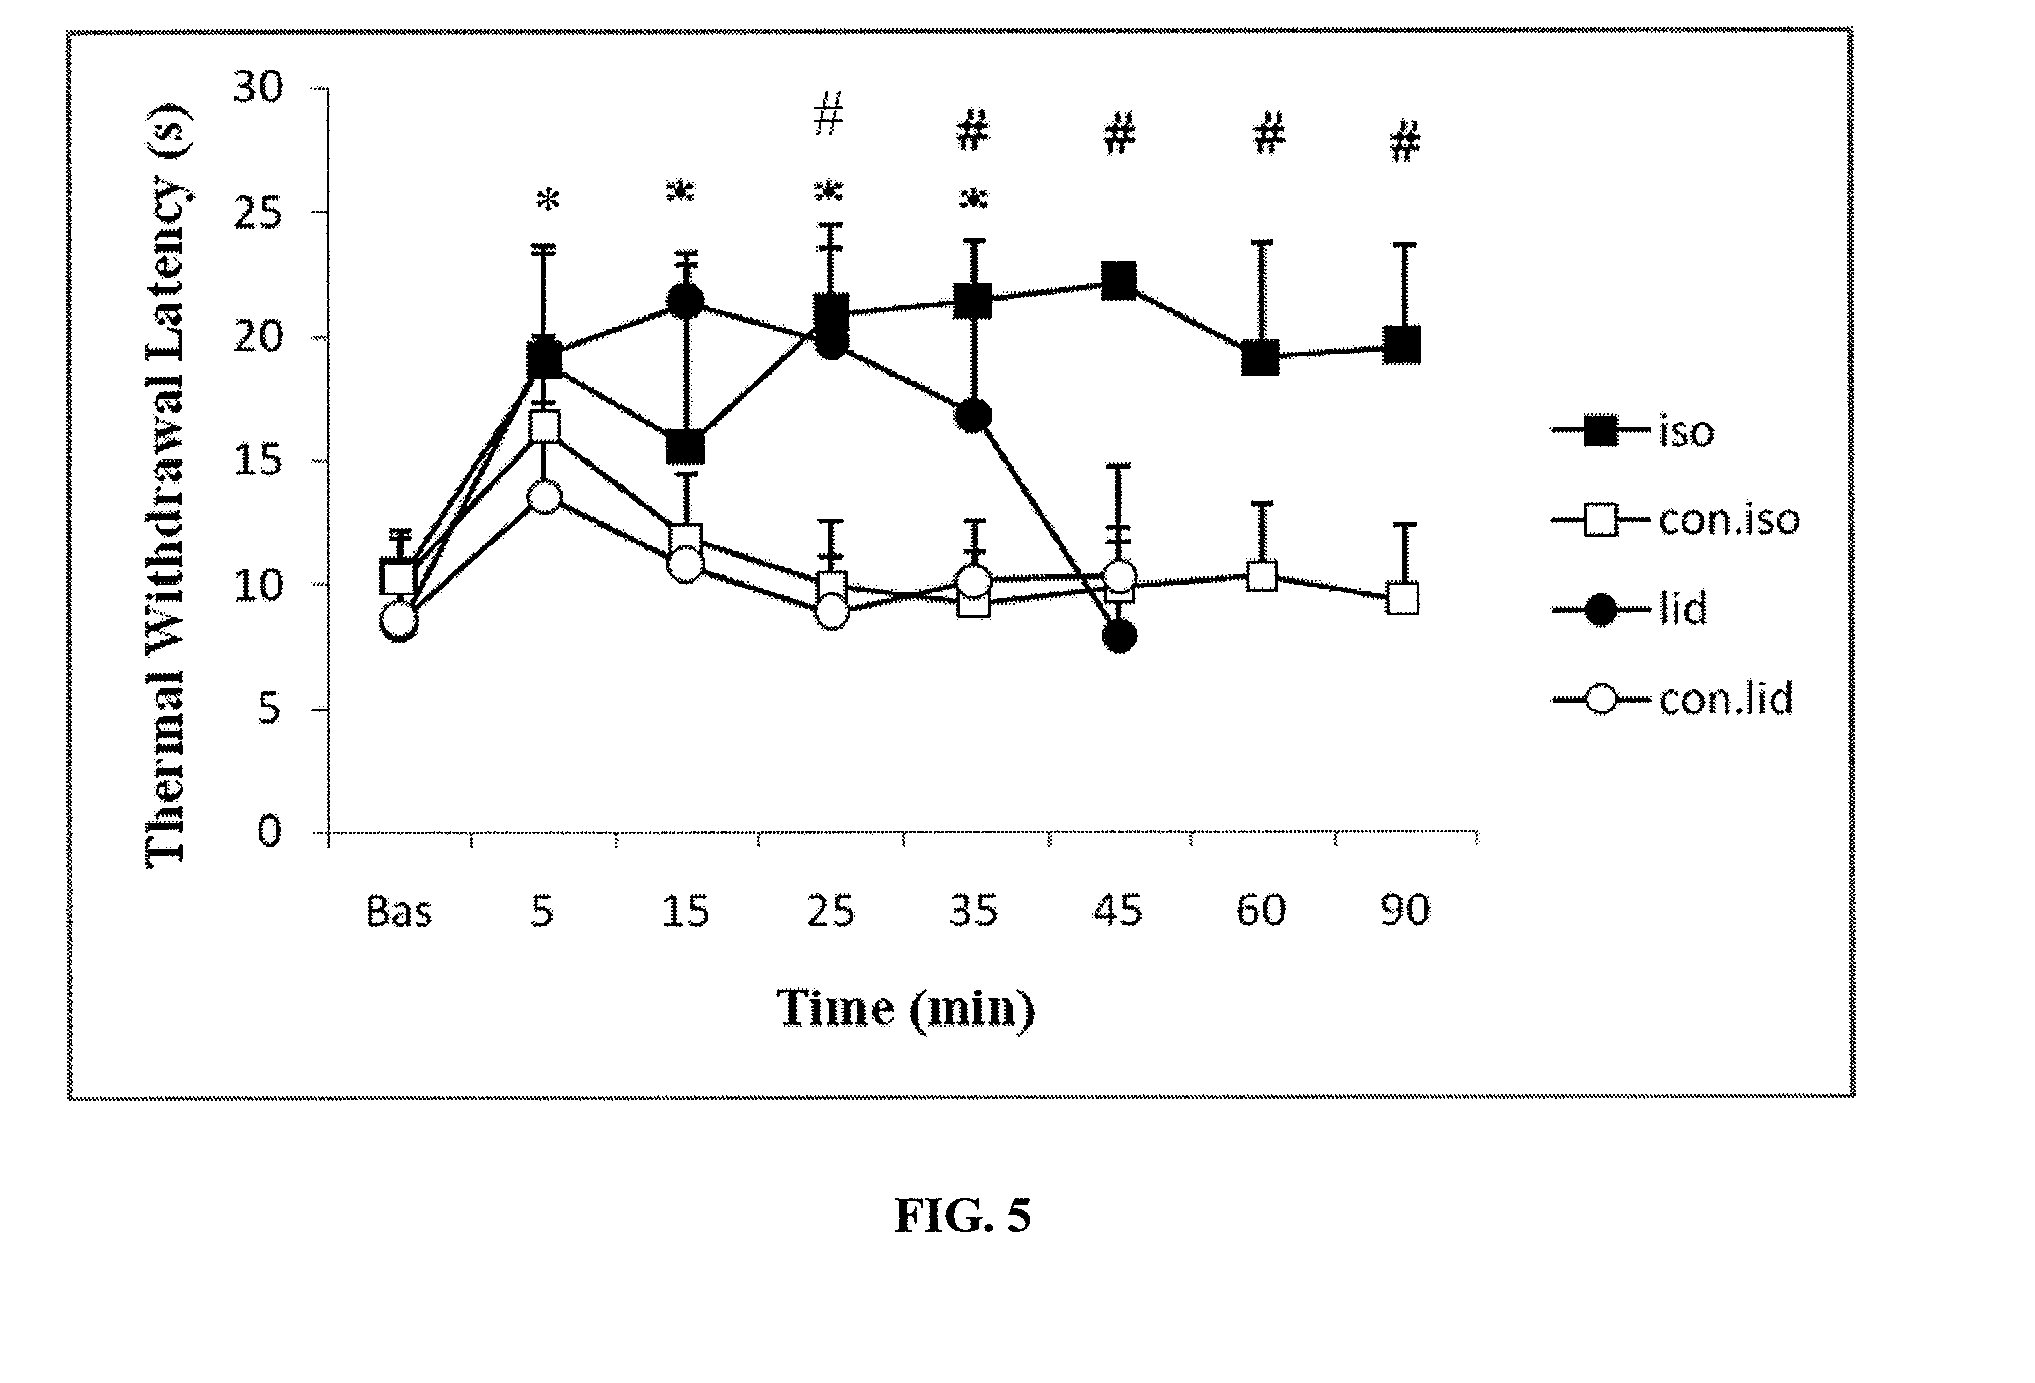 Volatile anesthetic compositions comprising extractive solvents for regional anesthesia and/or pain relief